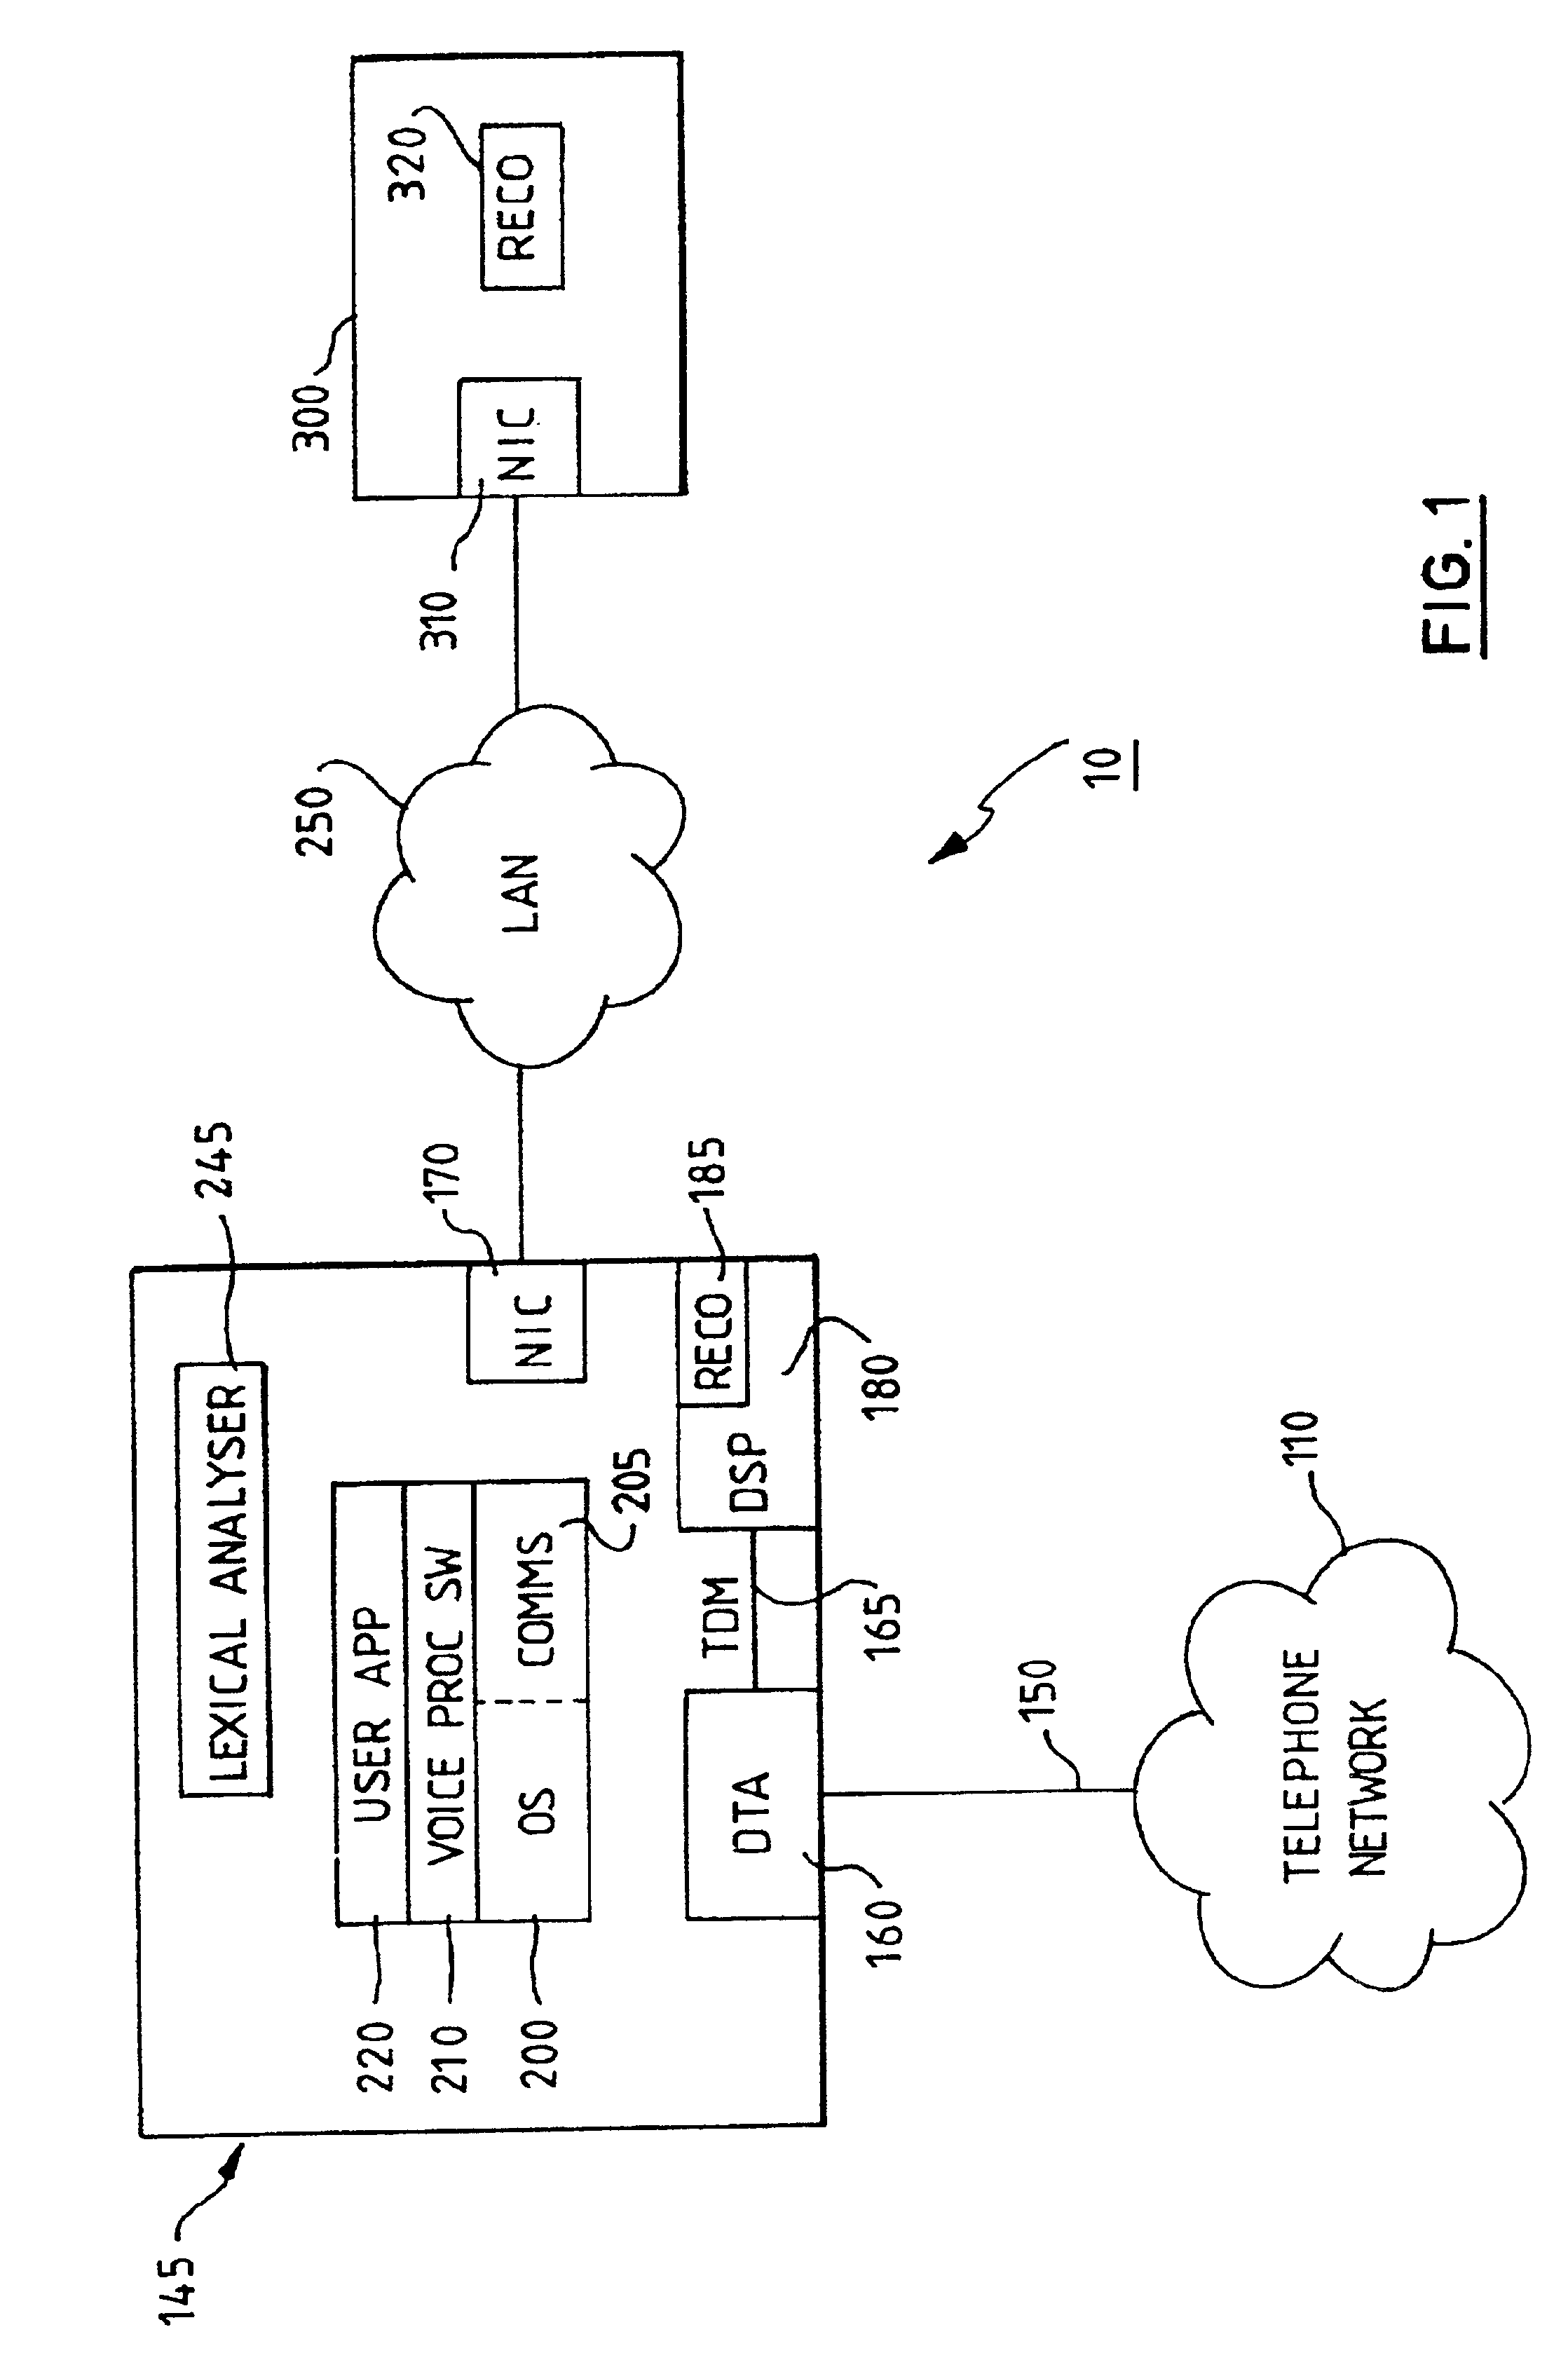 Speech recognition system with barge-in capability